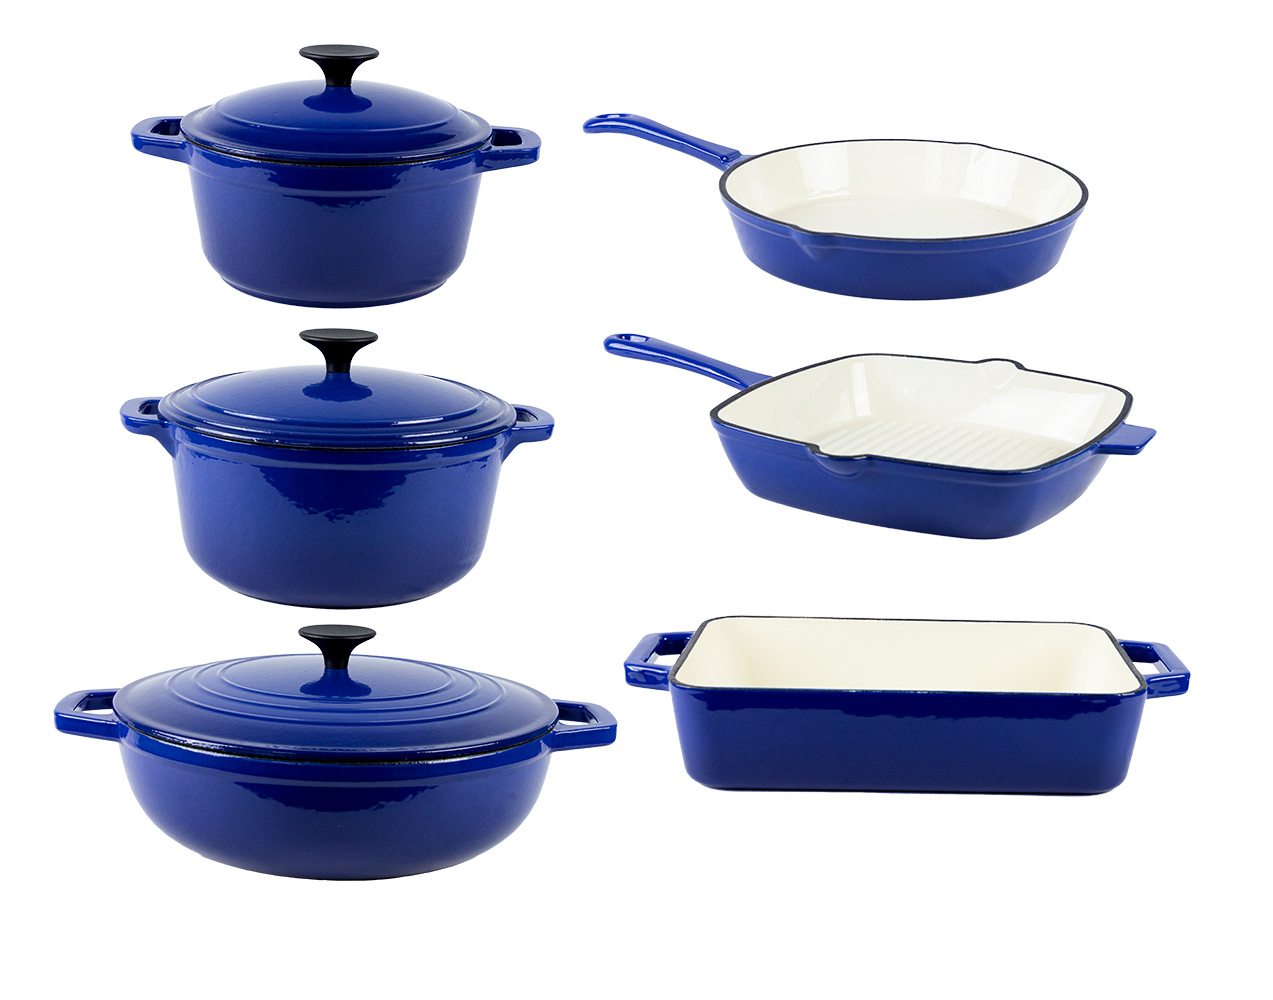 9 PC Enameled Cast Iron Cookware Set - Red